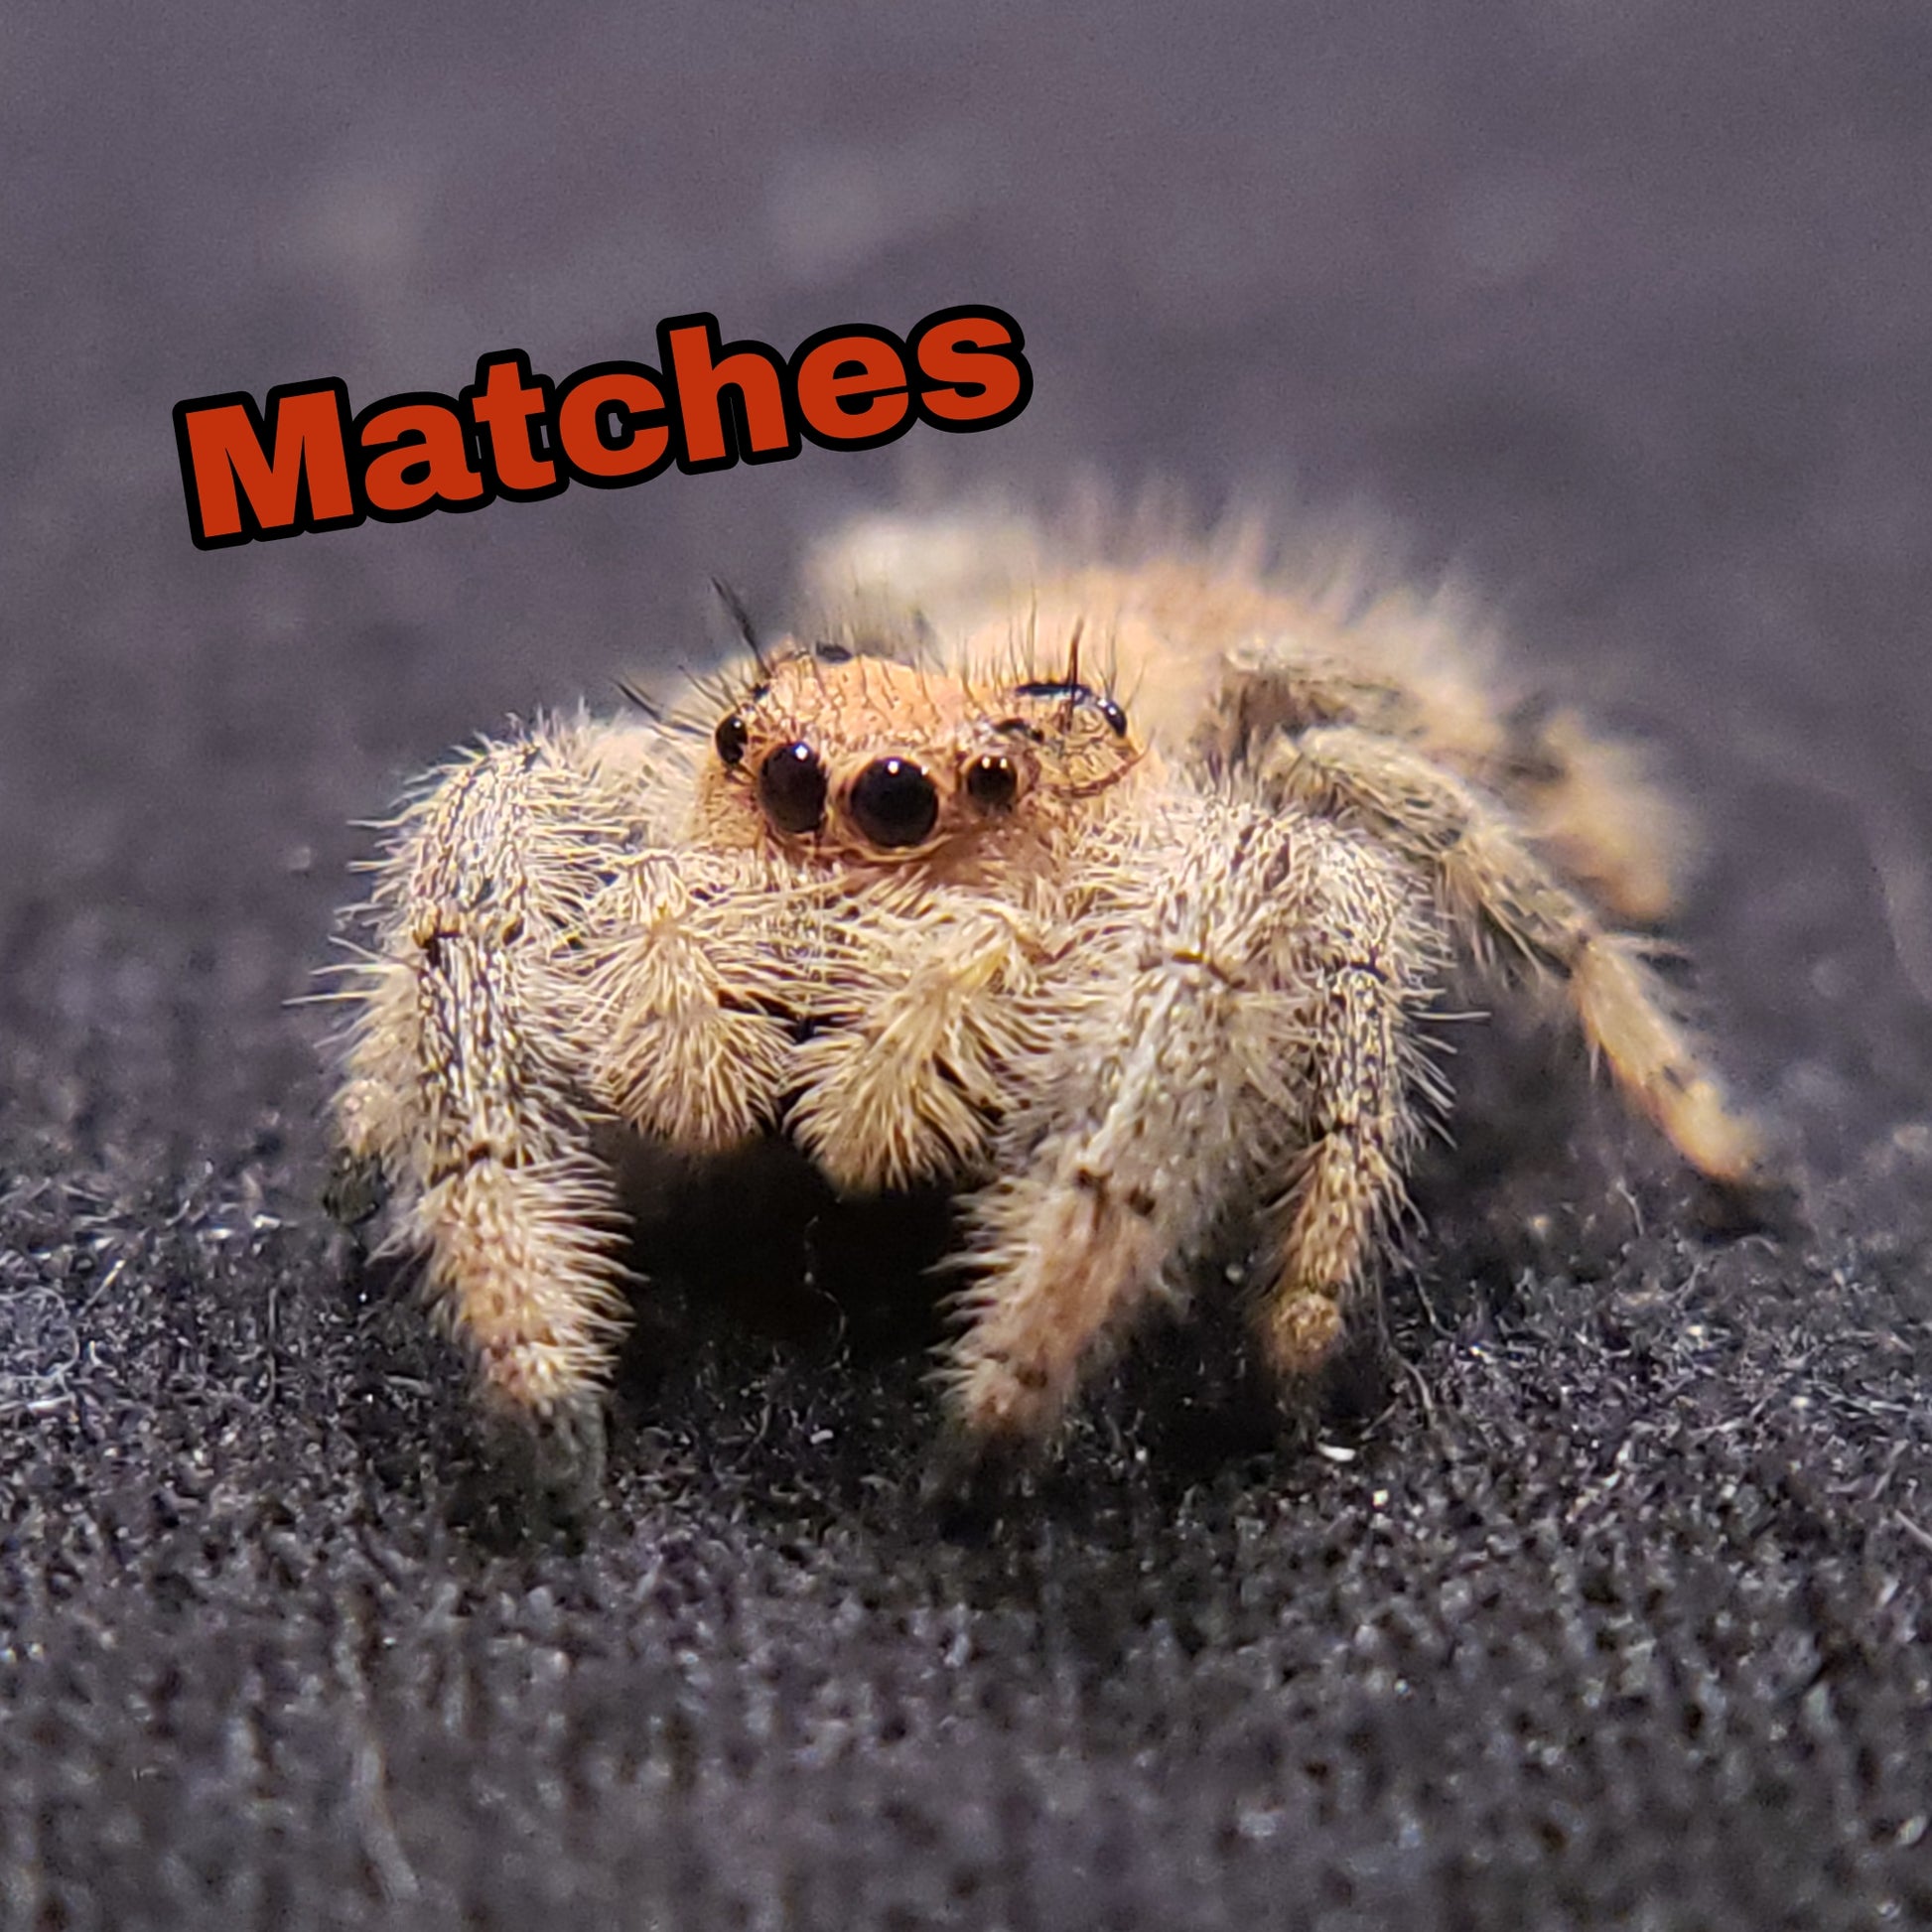 Regal Jumping Spider "Matches" - Jumping Spiders For Sale - Spiders Source - #1 Regal Jumping Spider Store